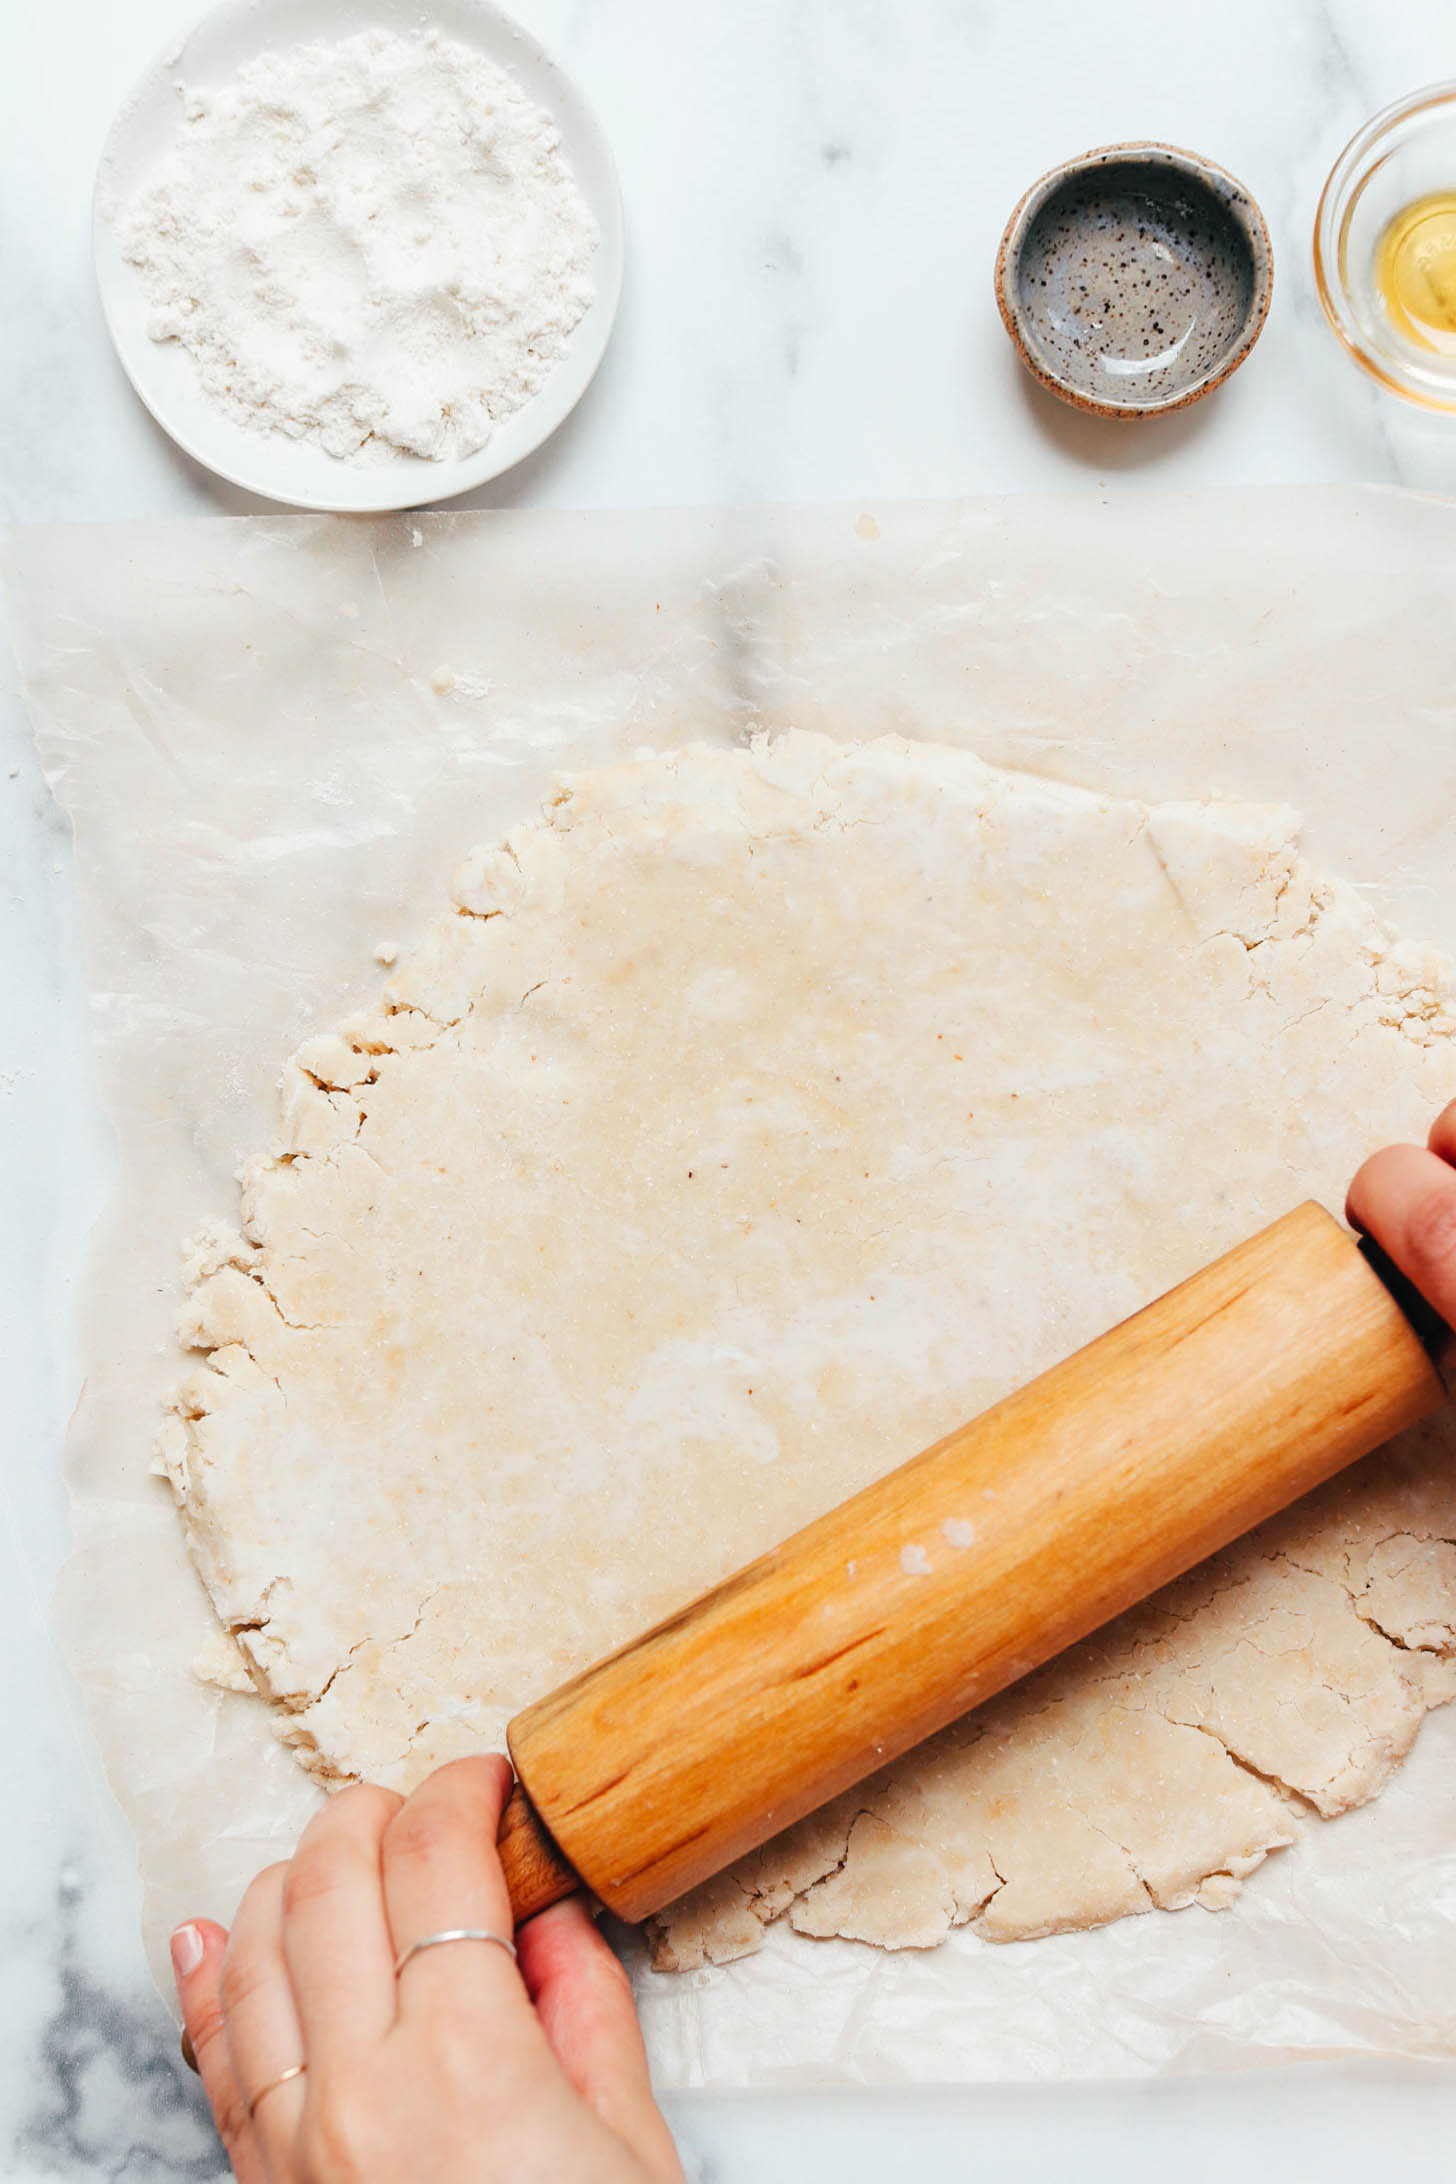 Using a rolling pin to roll out pie crust